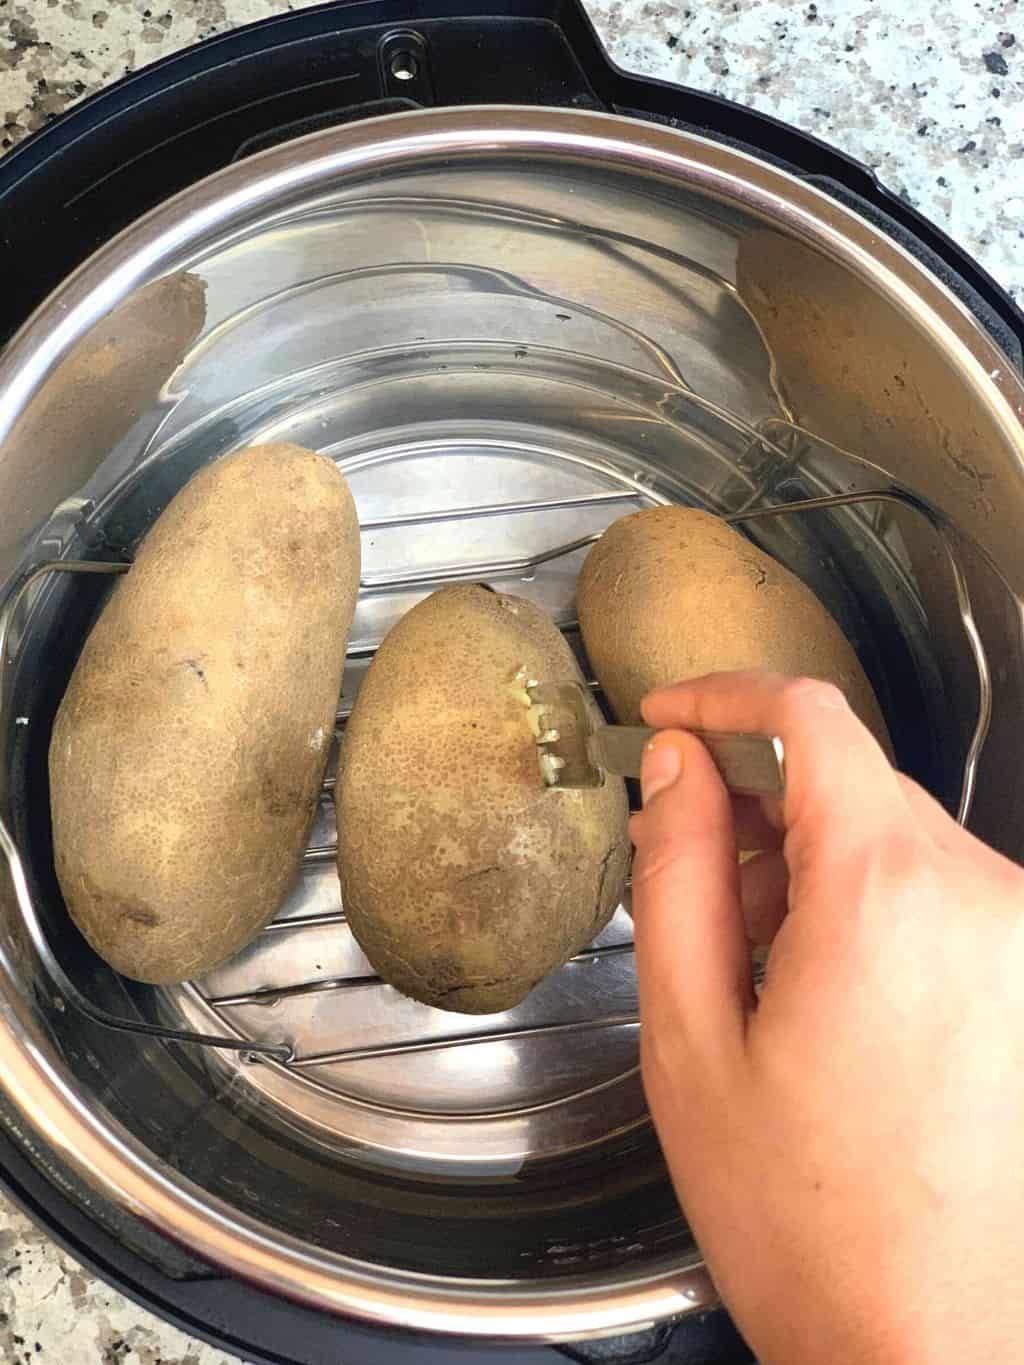 boiled potatoes in a trivet on a instant pot 